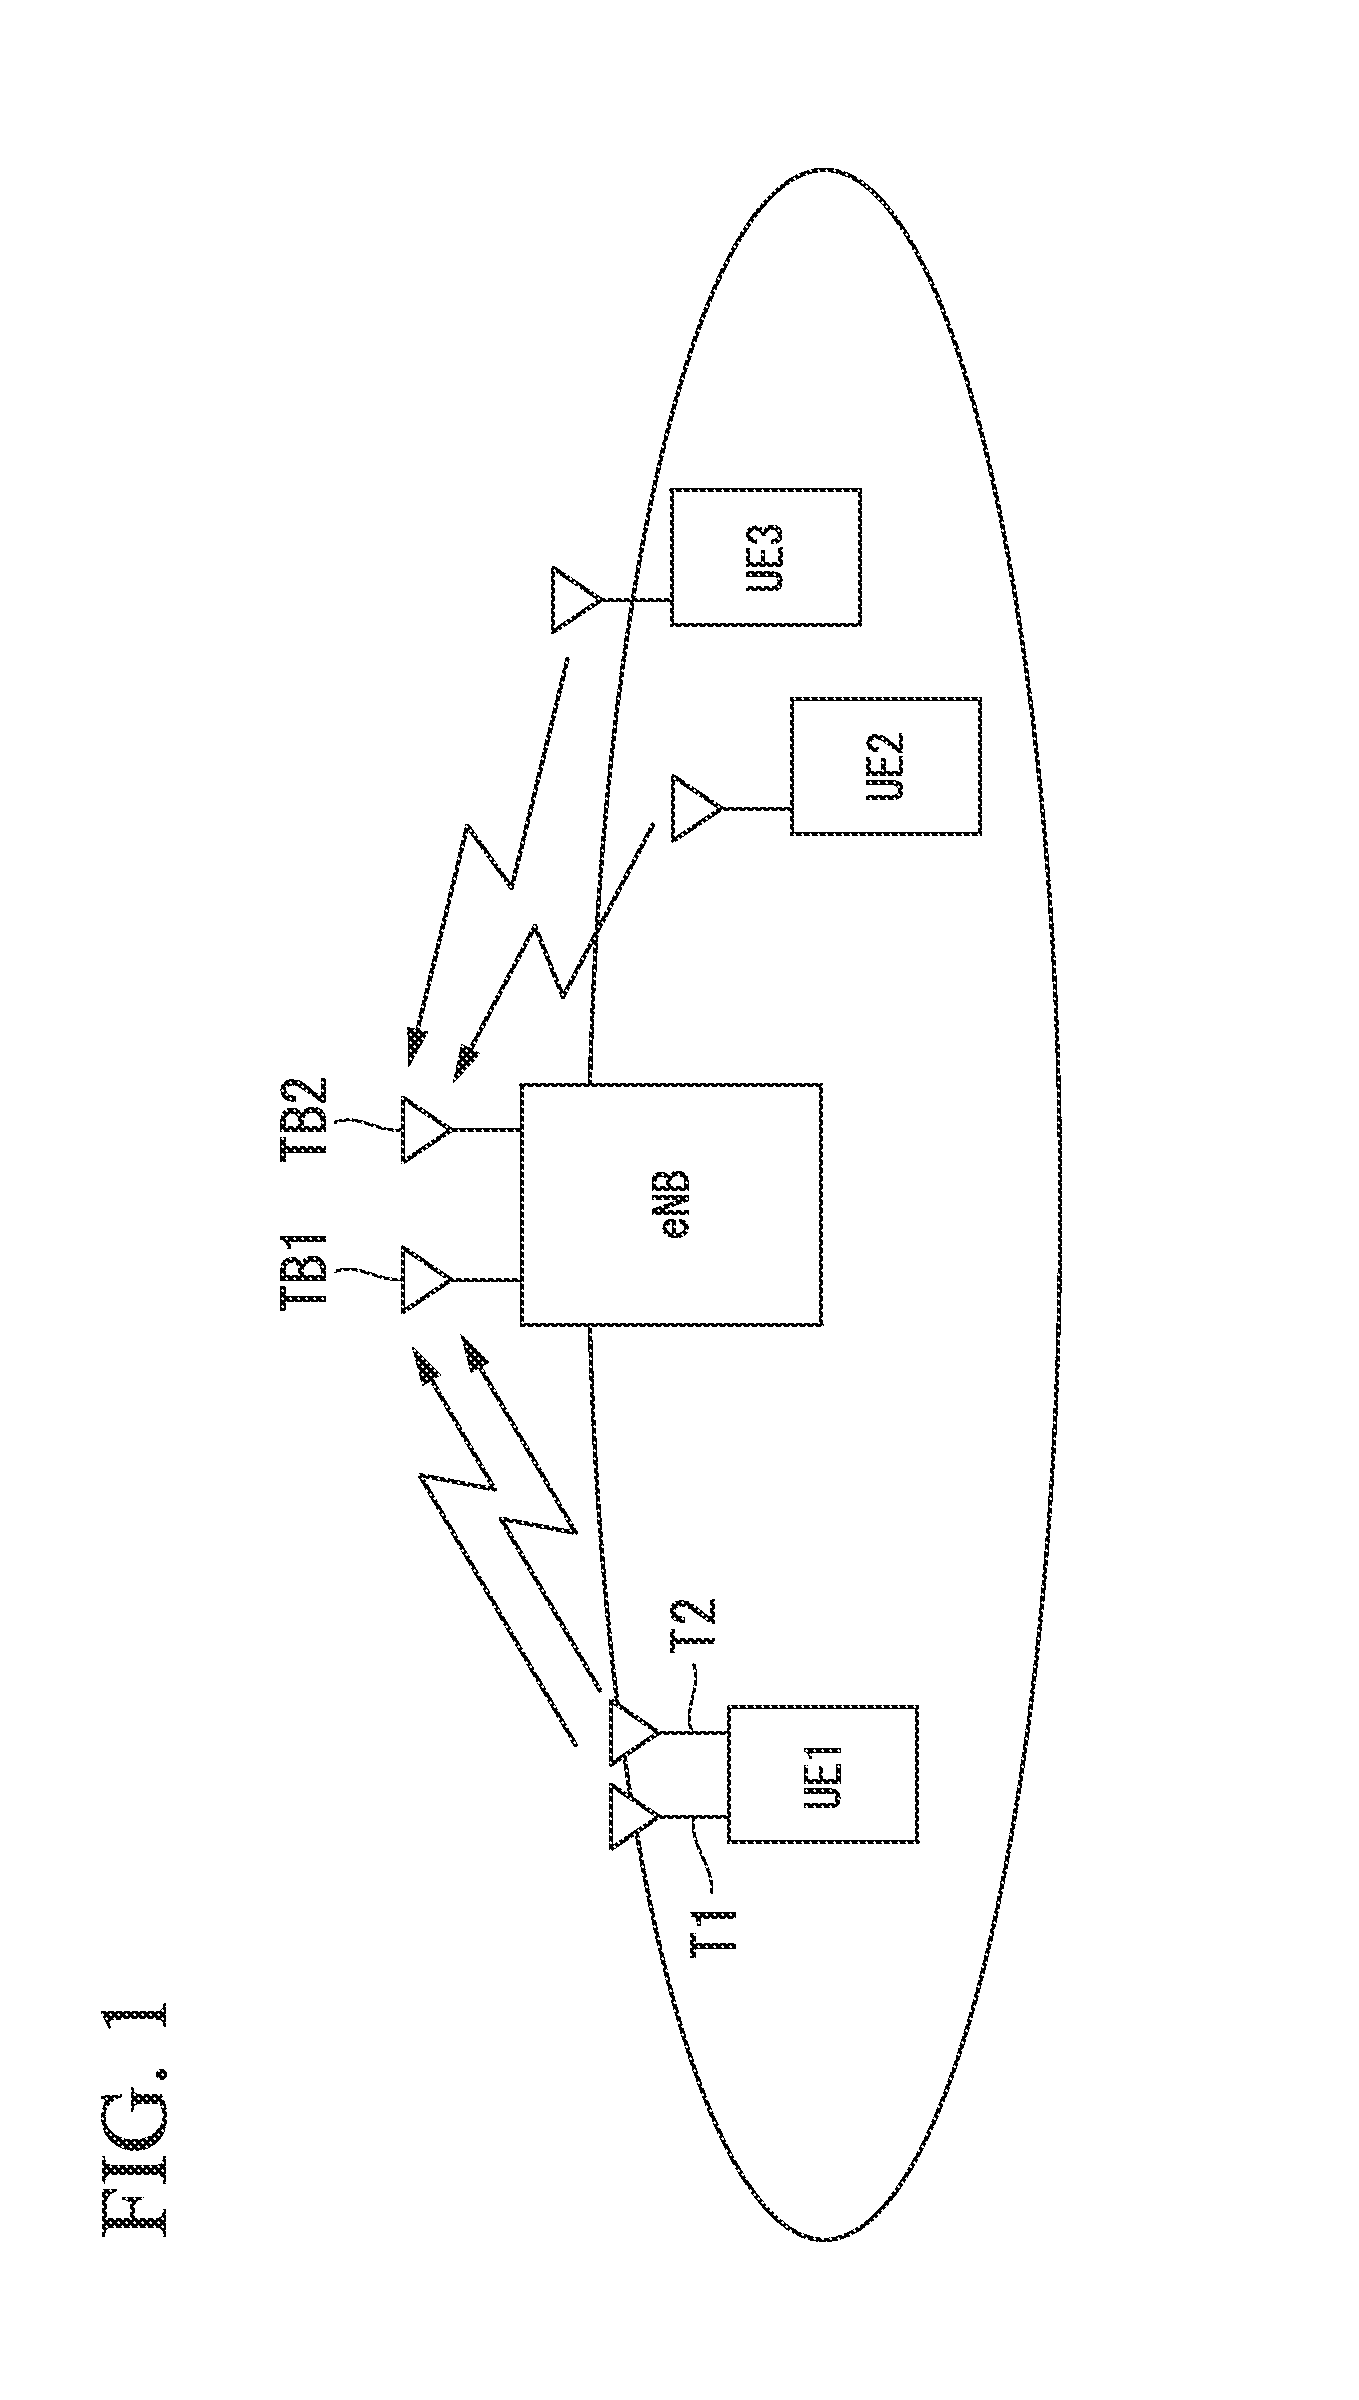 Wireless communication system, communication device, program, and integrated circuit